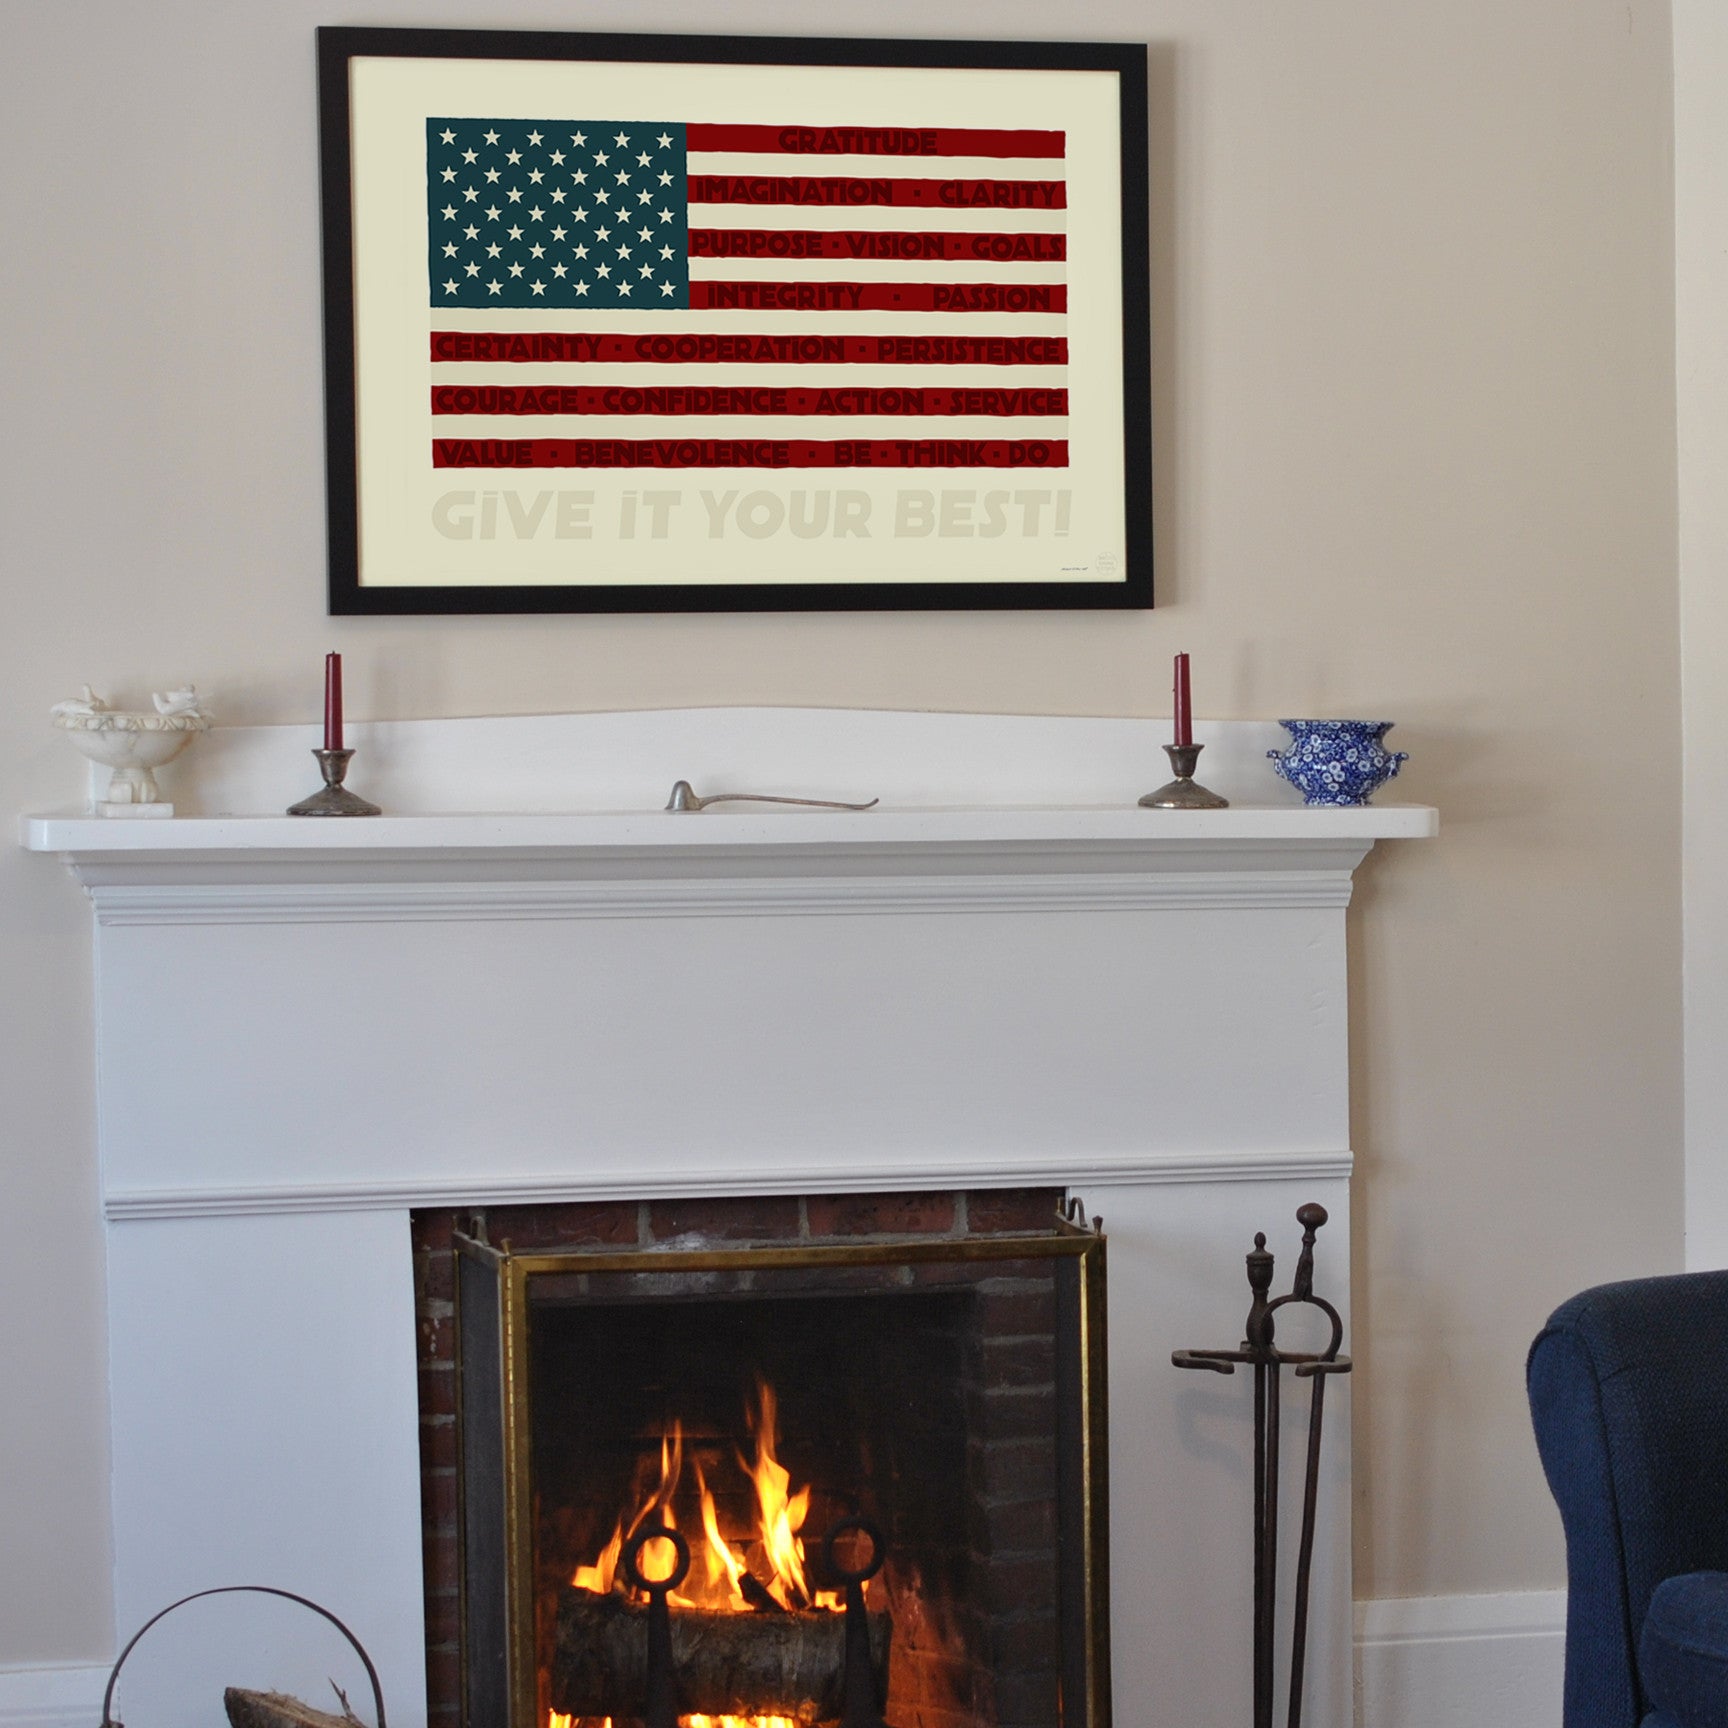 GIVE IT YOUR BEST! USA Flag Art Print 24" x 36" Framed Wall Poster